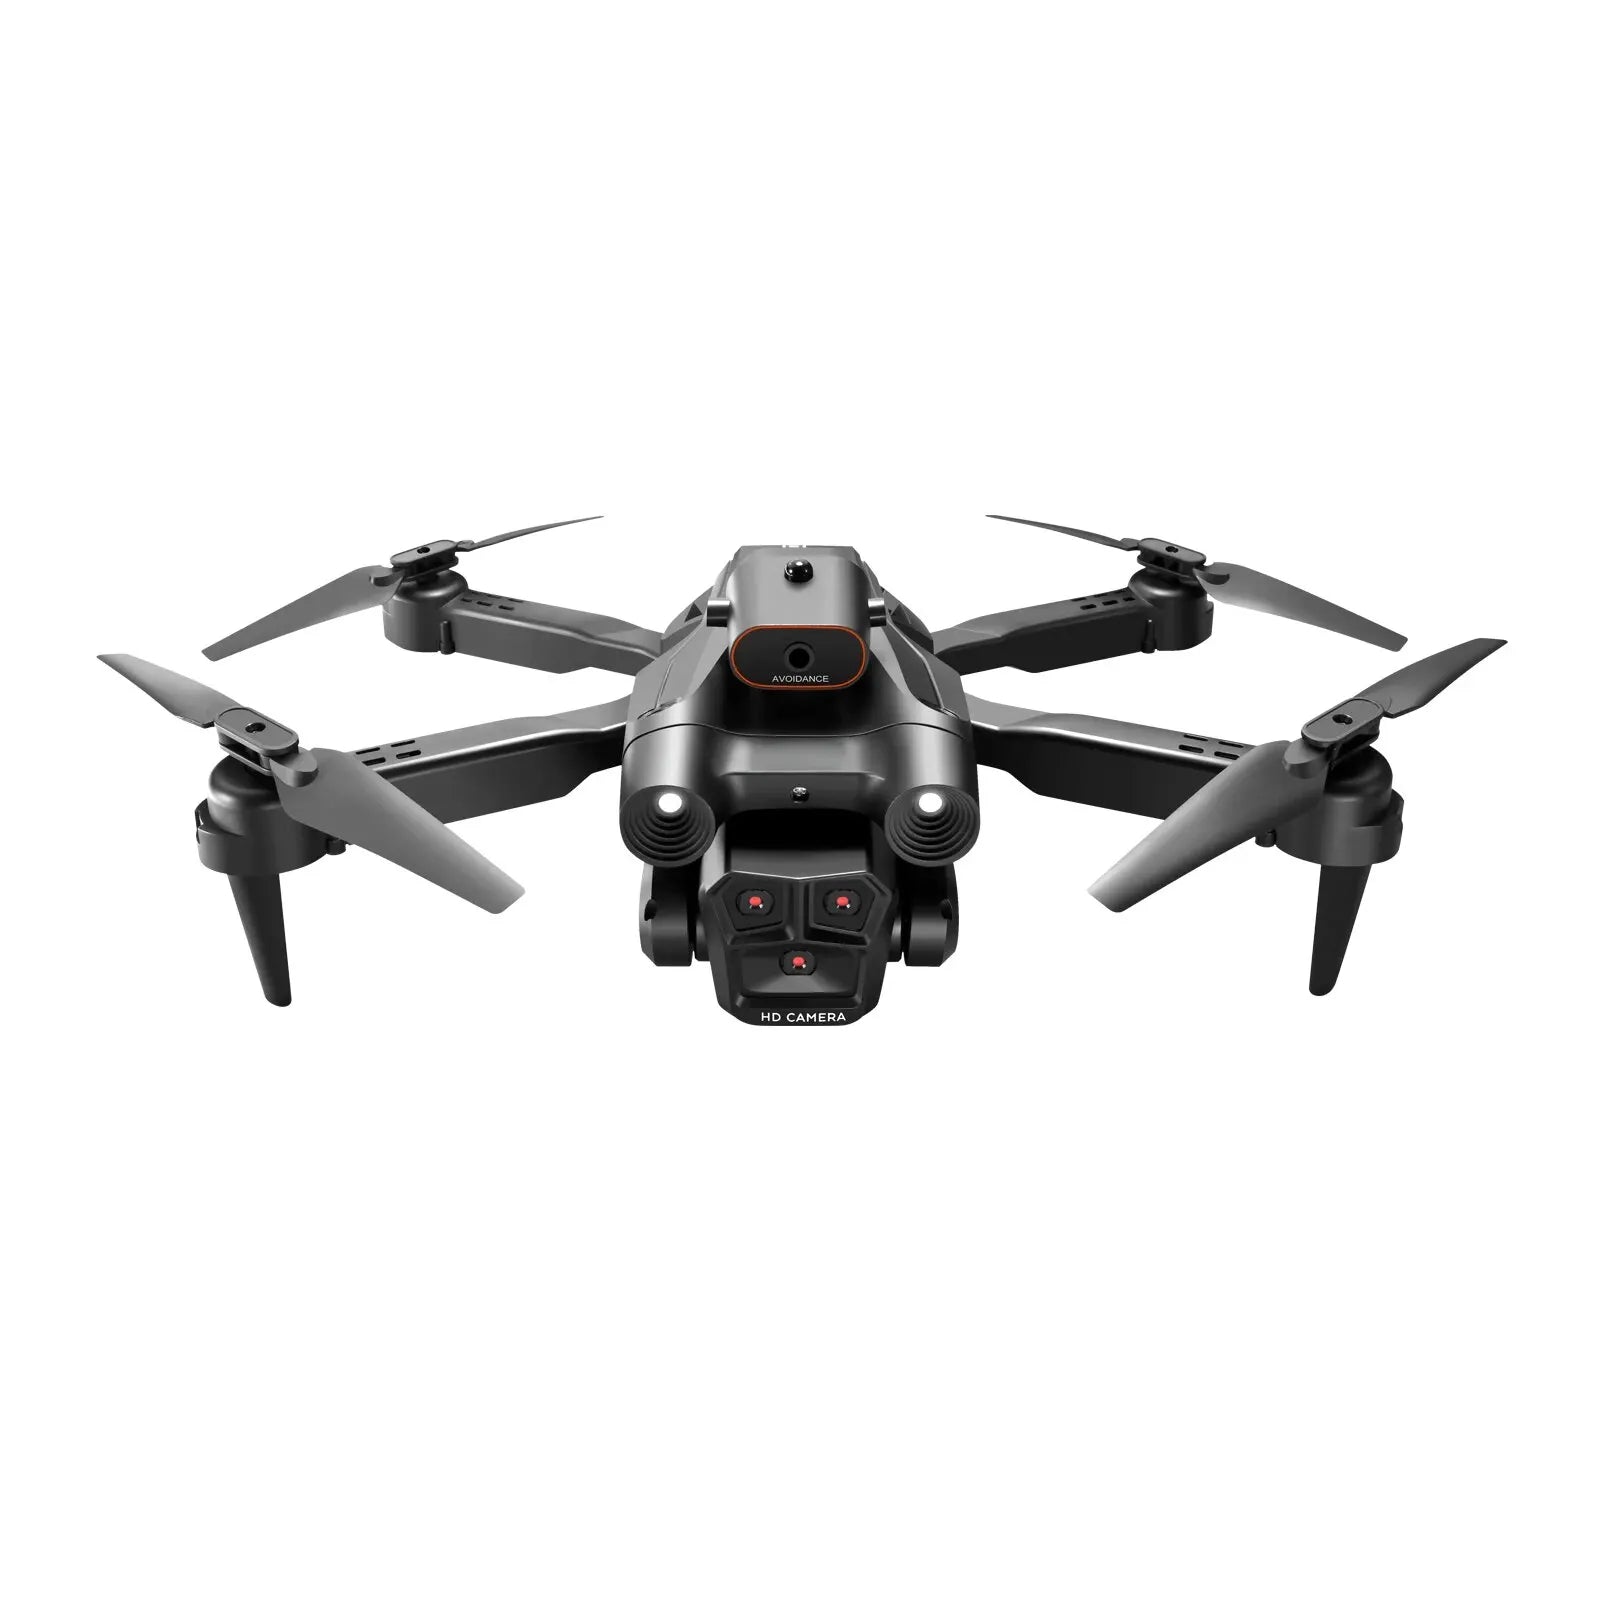 S92 Drone, this drone is foldable, making it easy to transport and store when